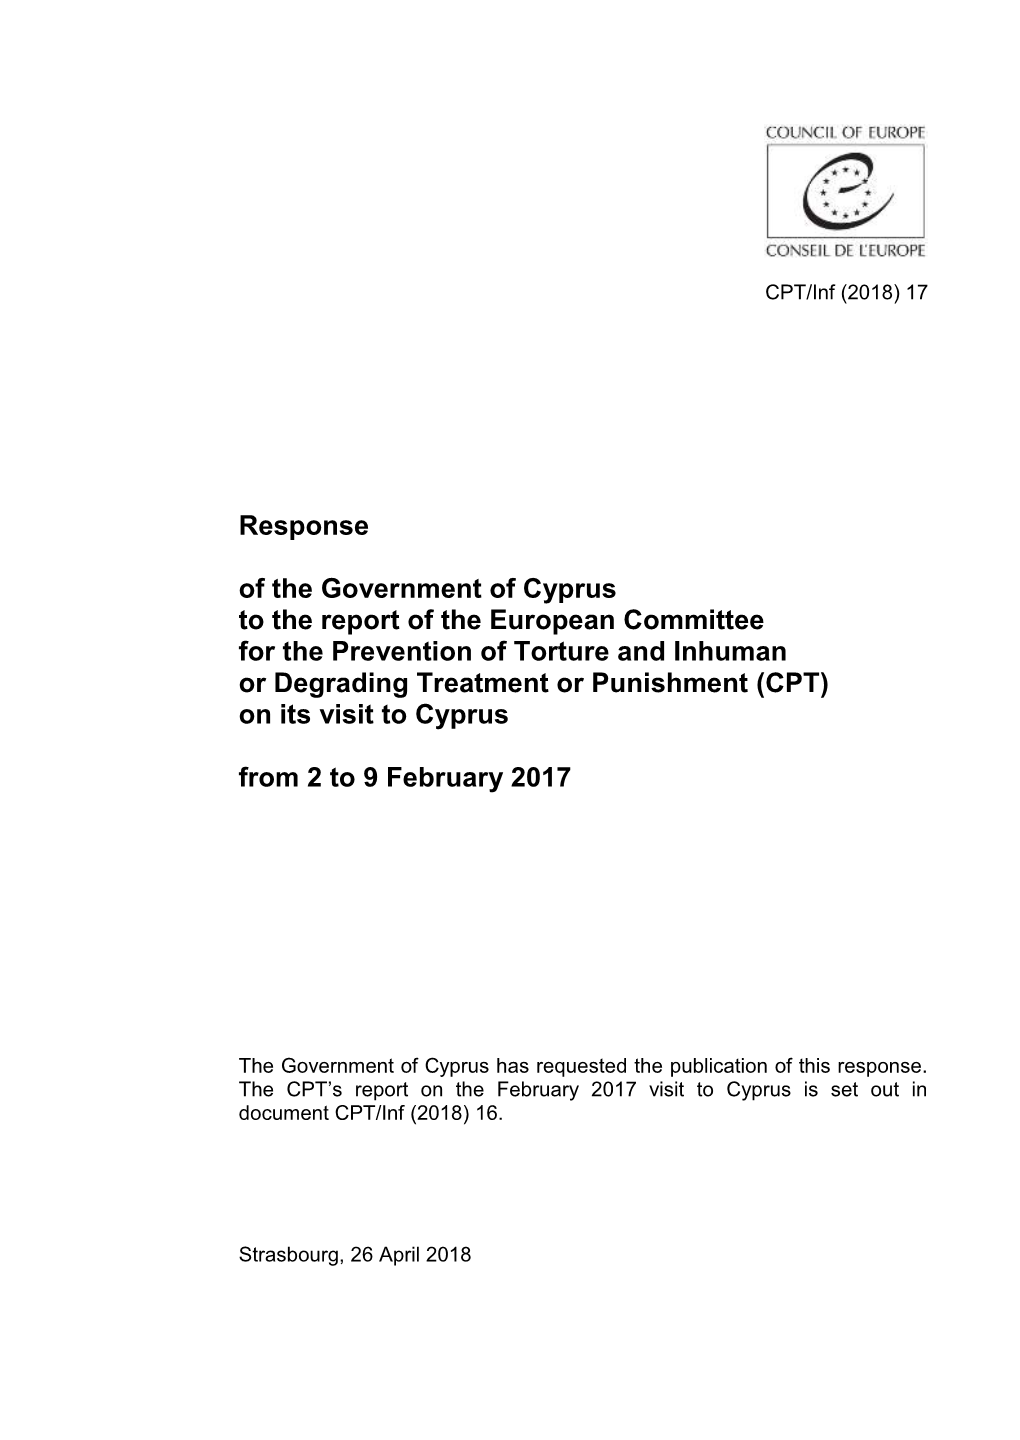 Response of the Government of Cyprus to the Report of The